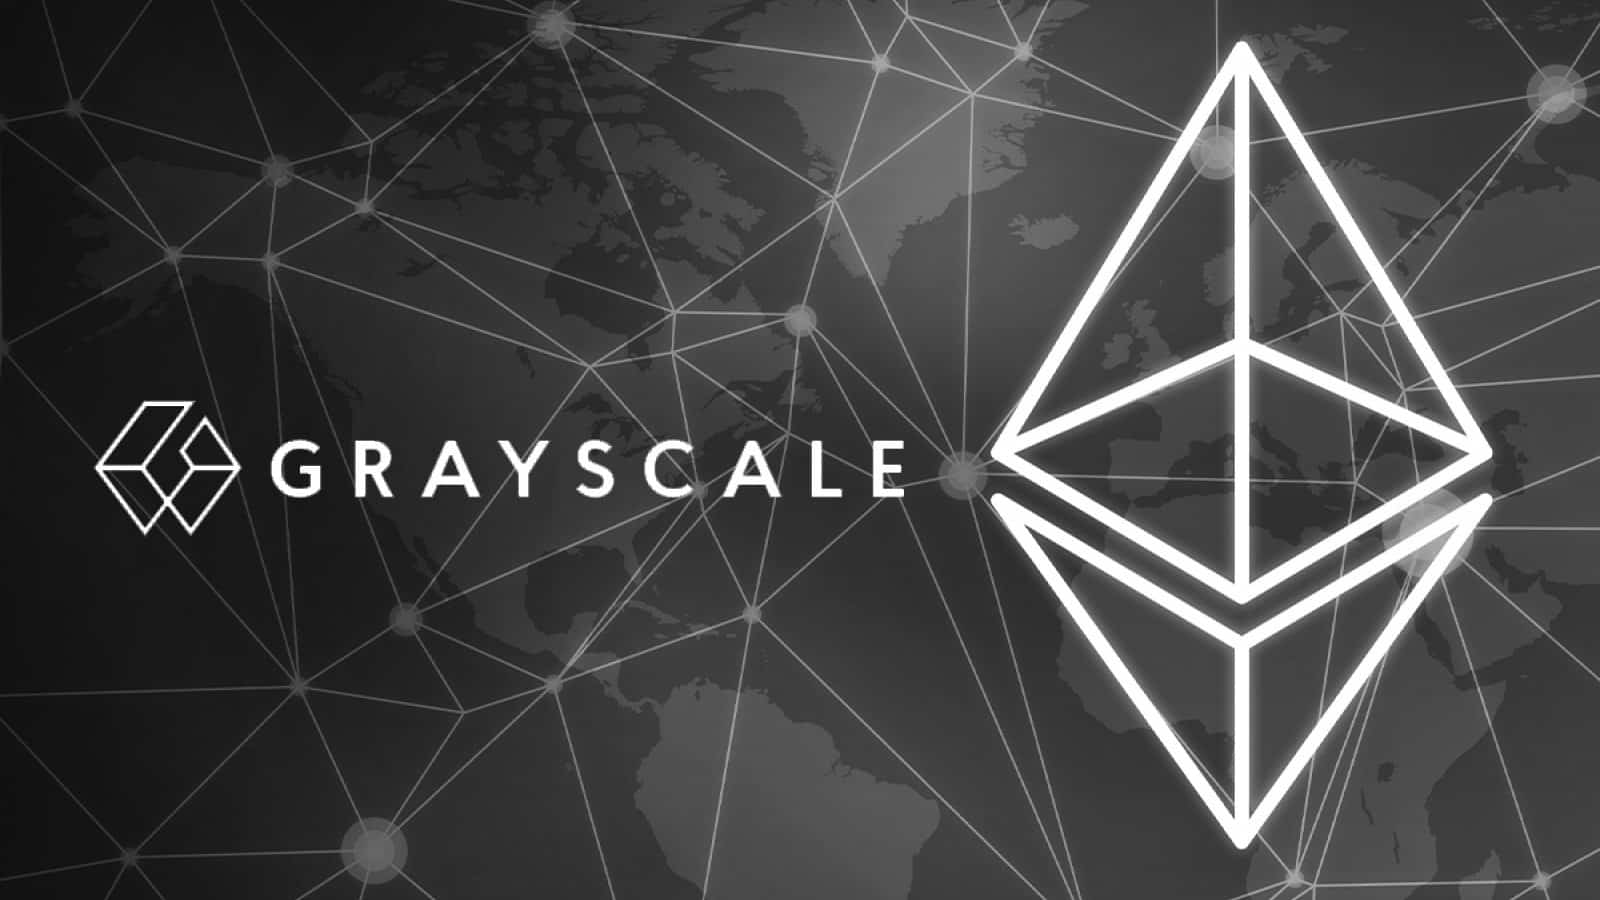 Grayscale will rebalance funds in favour of Solana (SOL) and Uniswap (UNI)